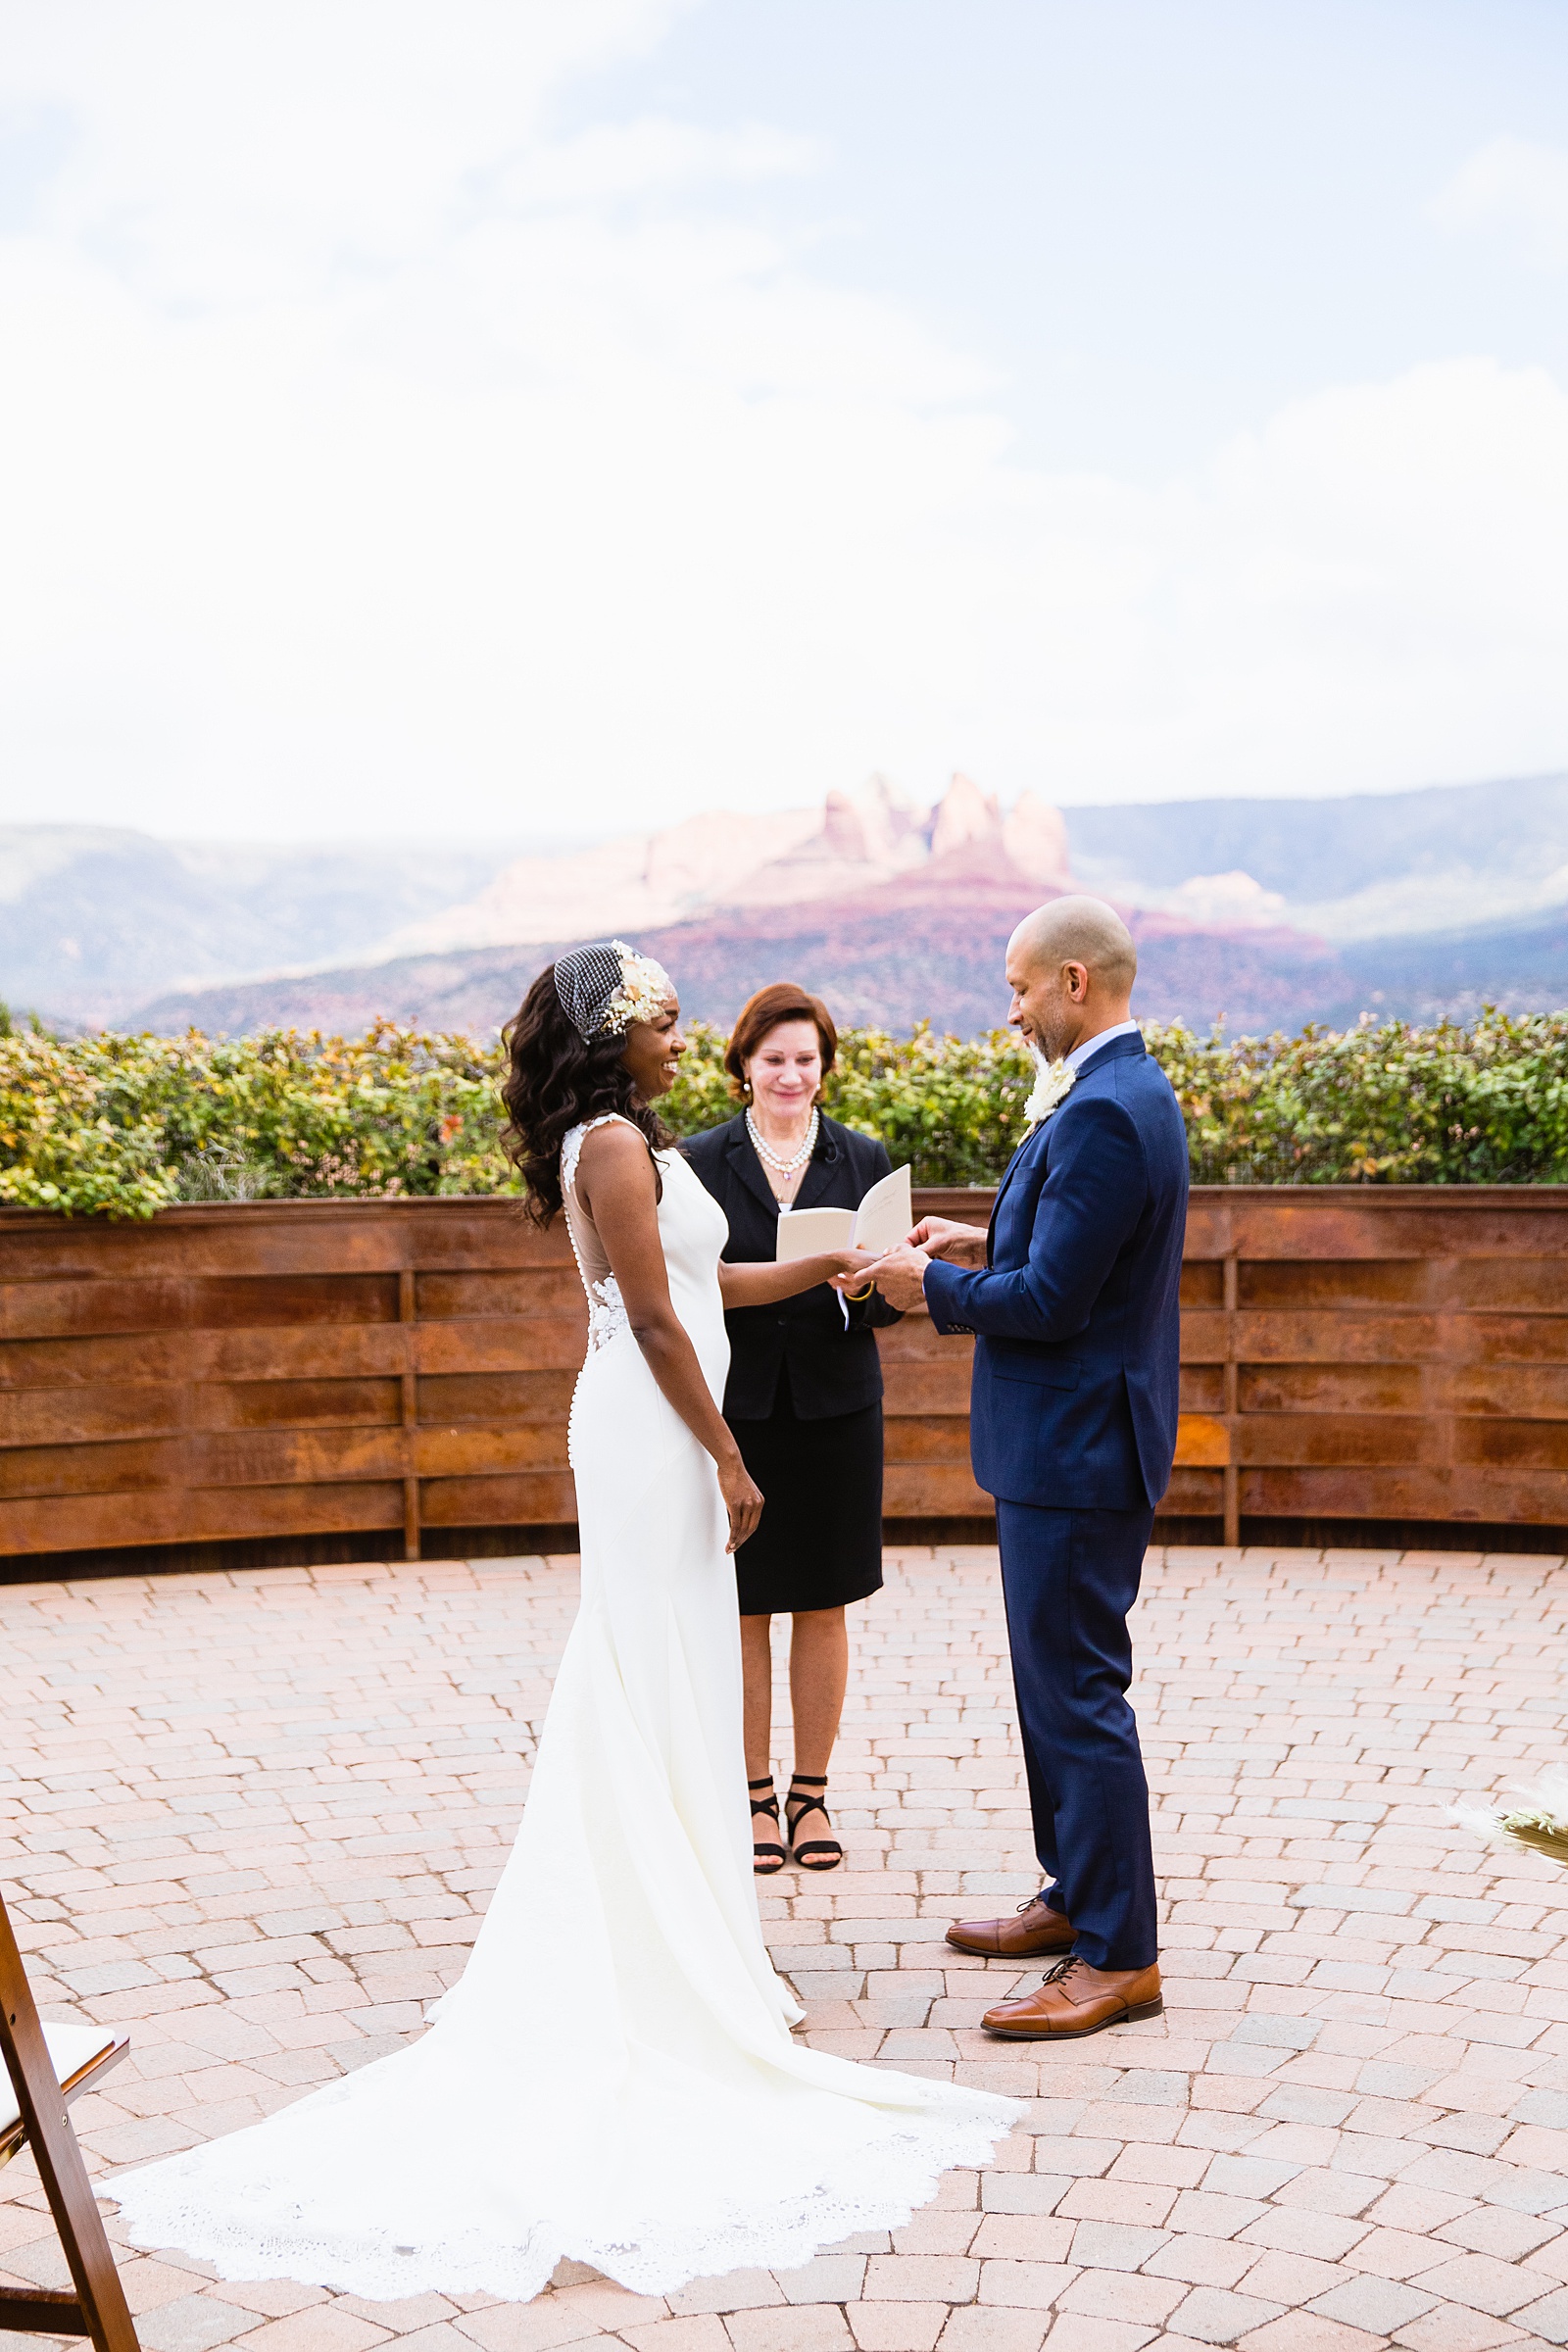 Bride and Groom exchange rings during their wedding ceremony at Agave of Sedona by Arizona wedding photographer PMA Photography.